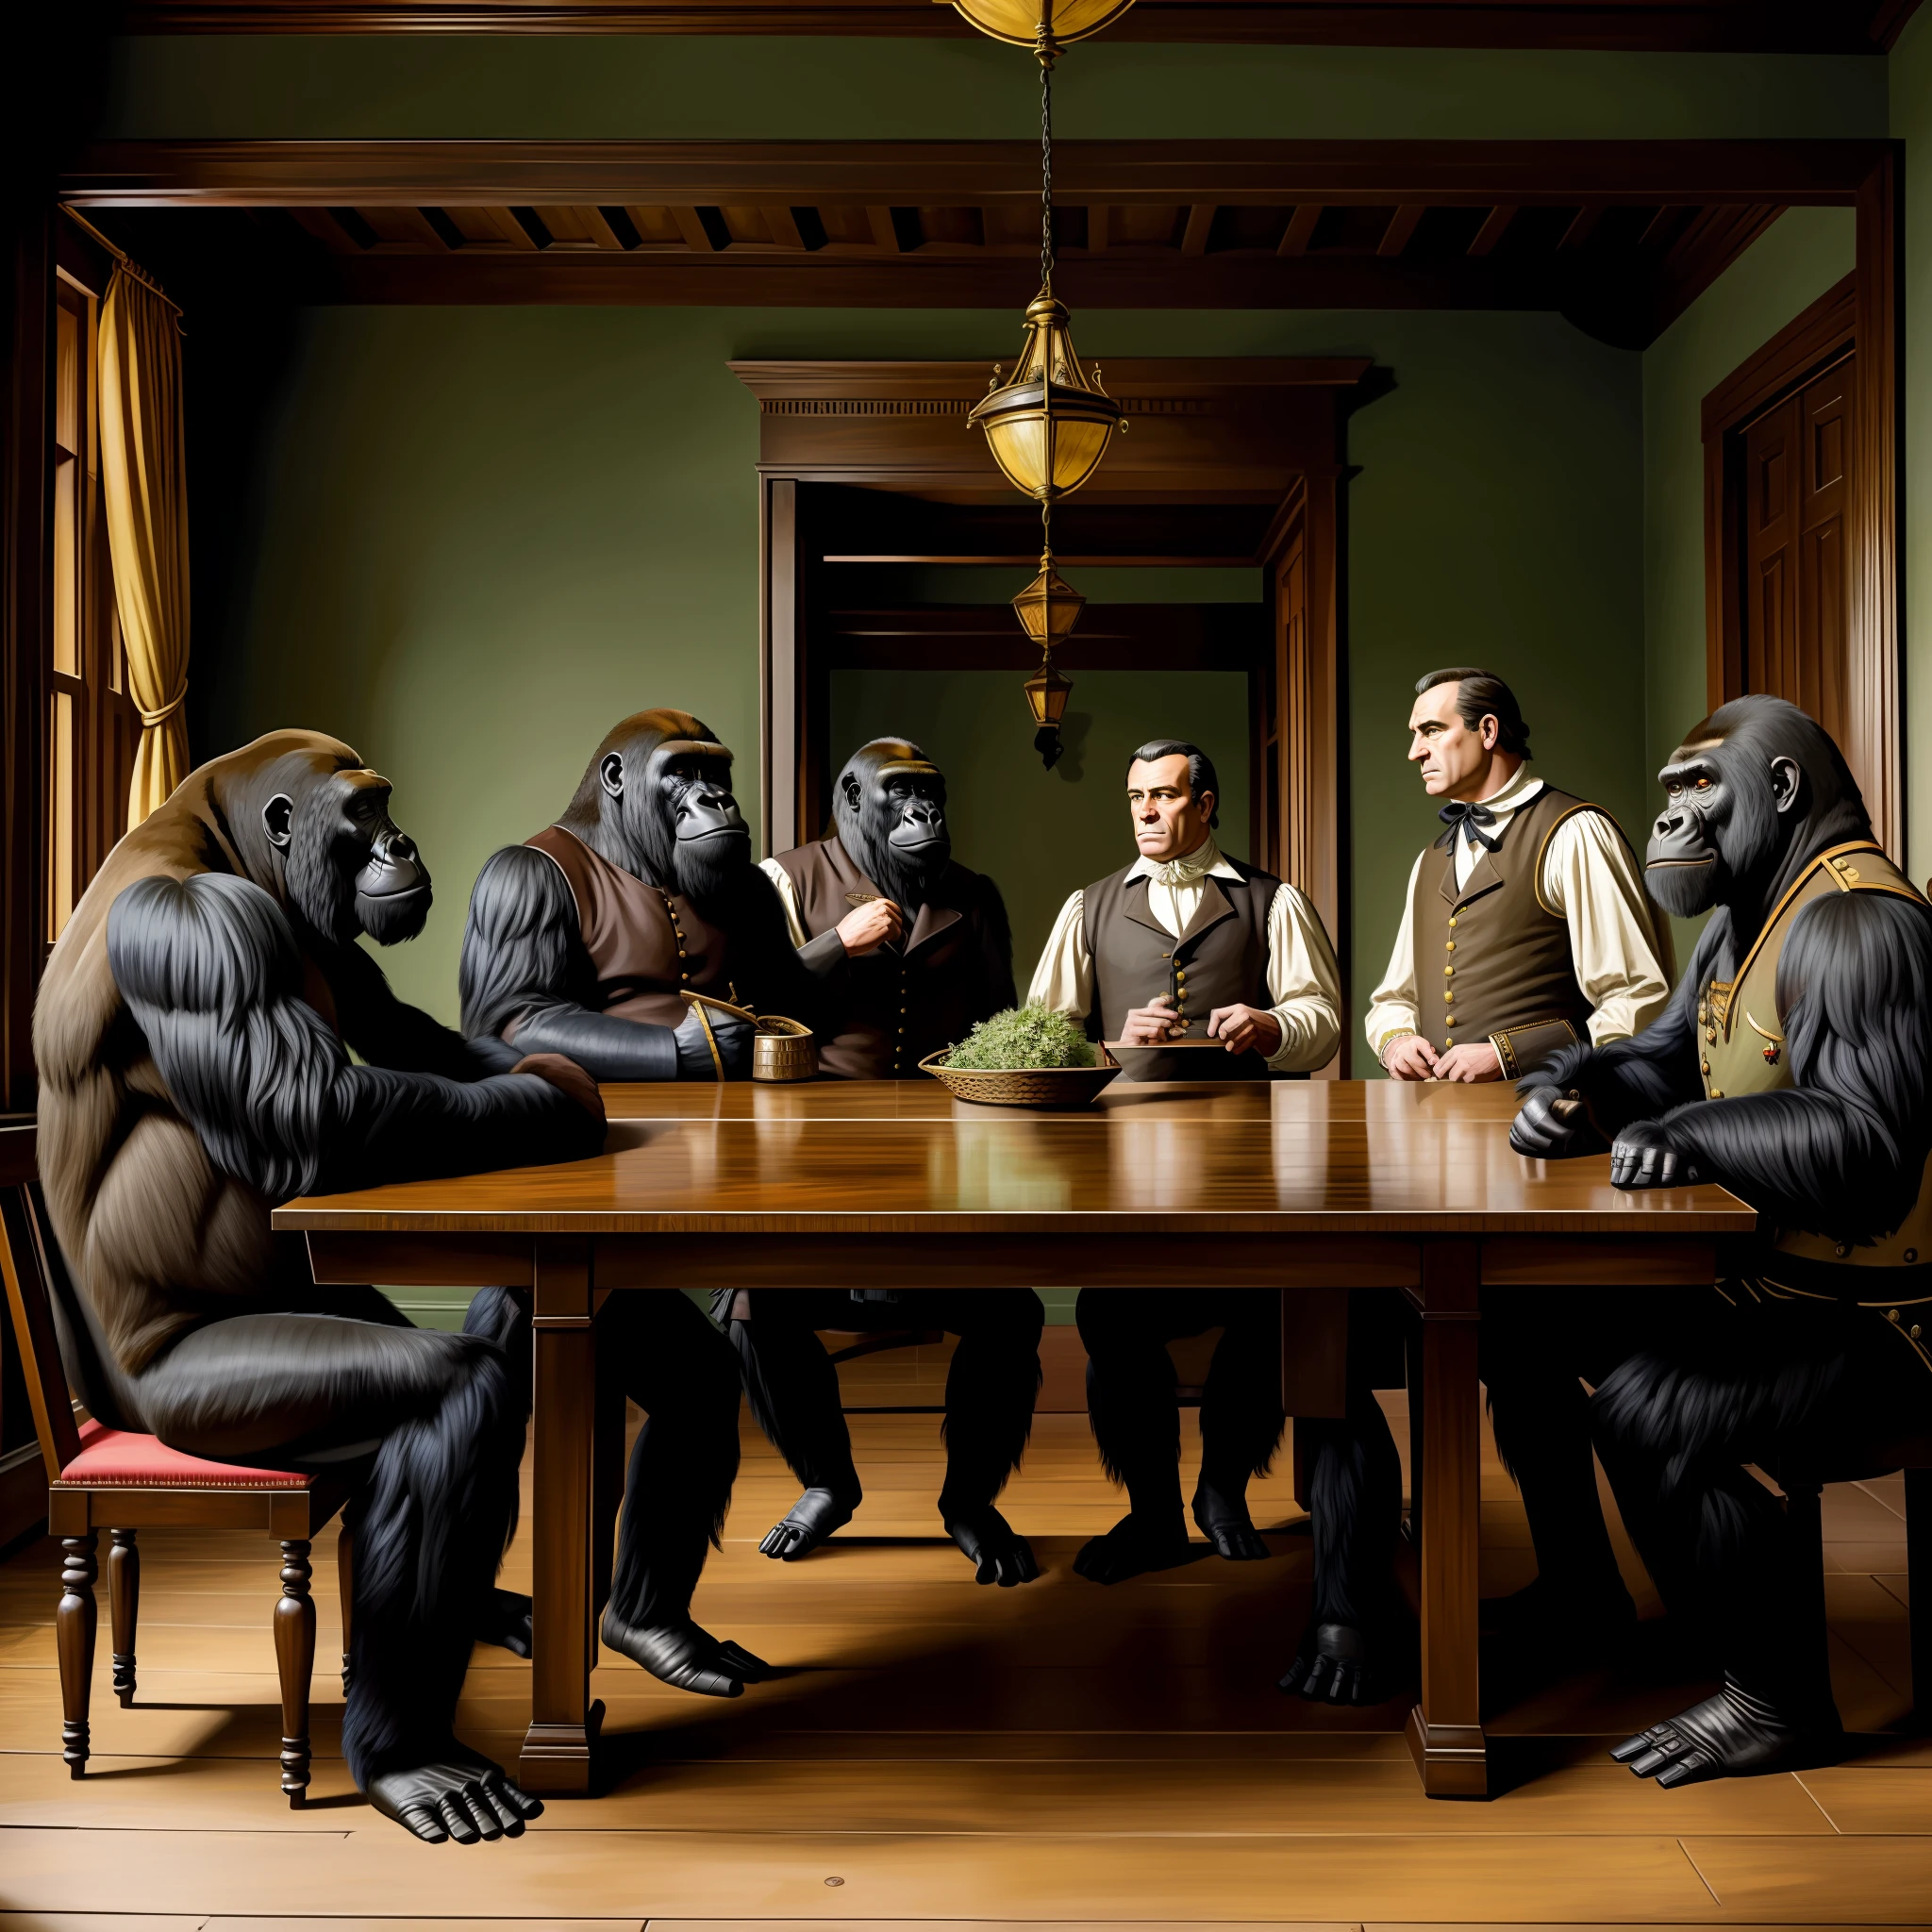 historical painting, panorama shot, in the hallway, gorillas debating, gorillas makin an argument, gorilas in colonial outfits, conversation, colonial era style, detailed clothing, serious faces, dialogue, negotiation , at the table, negotiation table, gorillas in colonial suits, gorillas in military equipment